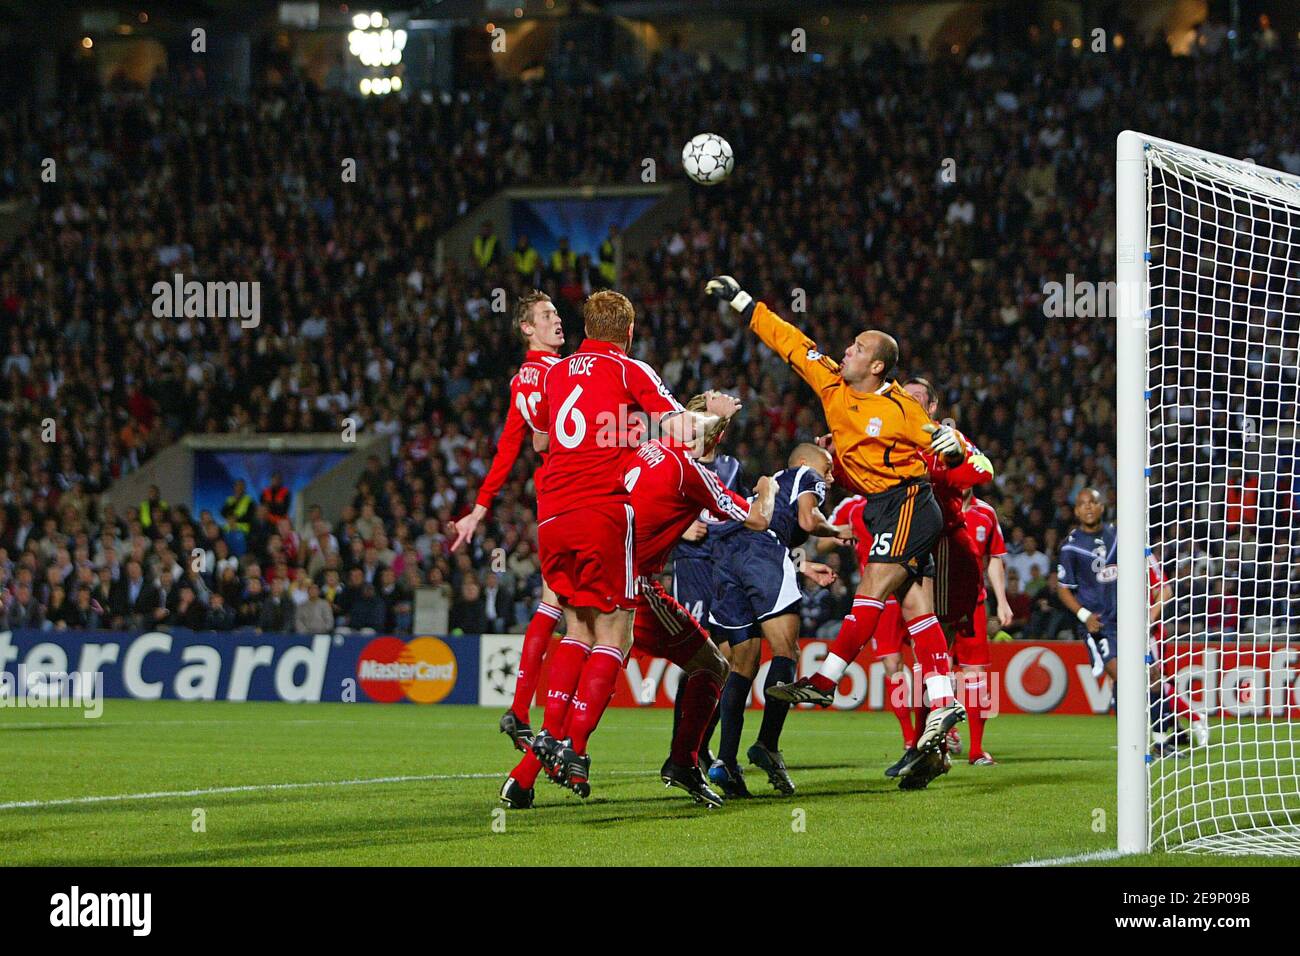 Liverpool's goalkeeper Pepe Reina during the Champions League group C match, FC Girondins De Bordeaux vs Liverpool FC, at Chaban-Delmas Stadium in Bordeaux, France, on October 18, 2006. Liverpool won 1-0. Photo by Manuel Blondeau/Cameleon/ABACAPRESS.COM Stock Photo